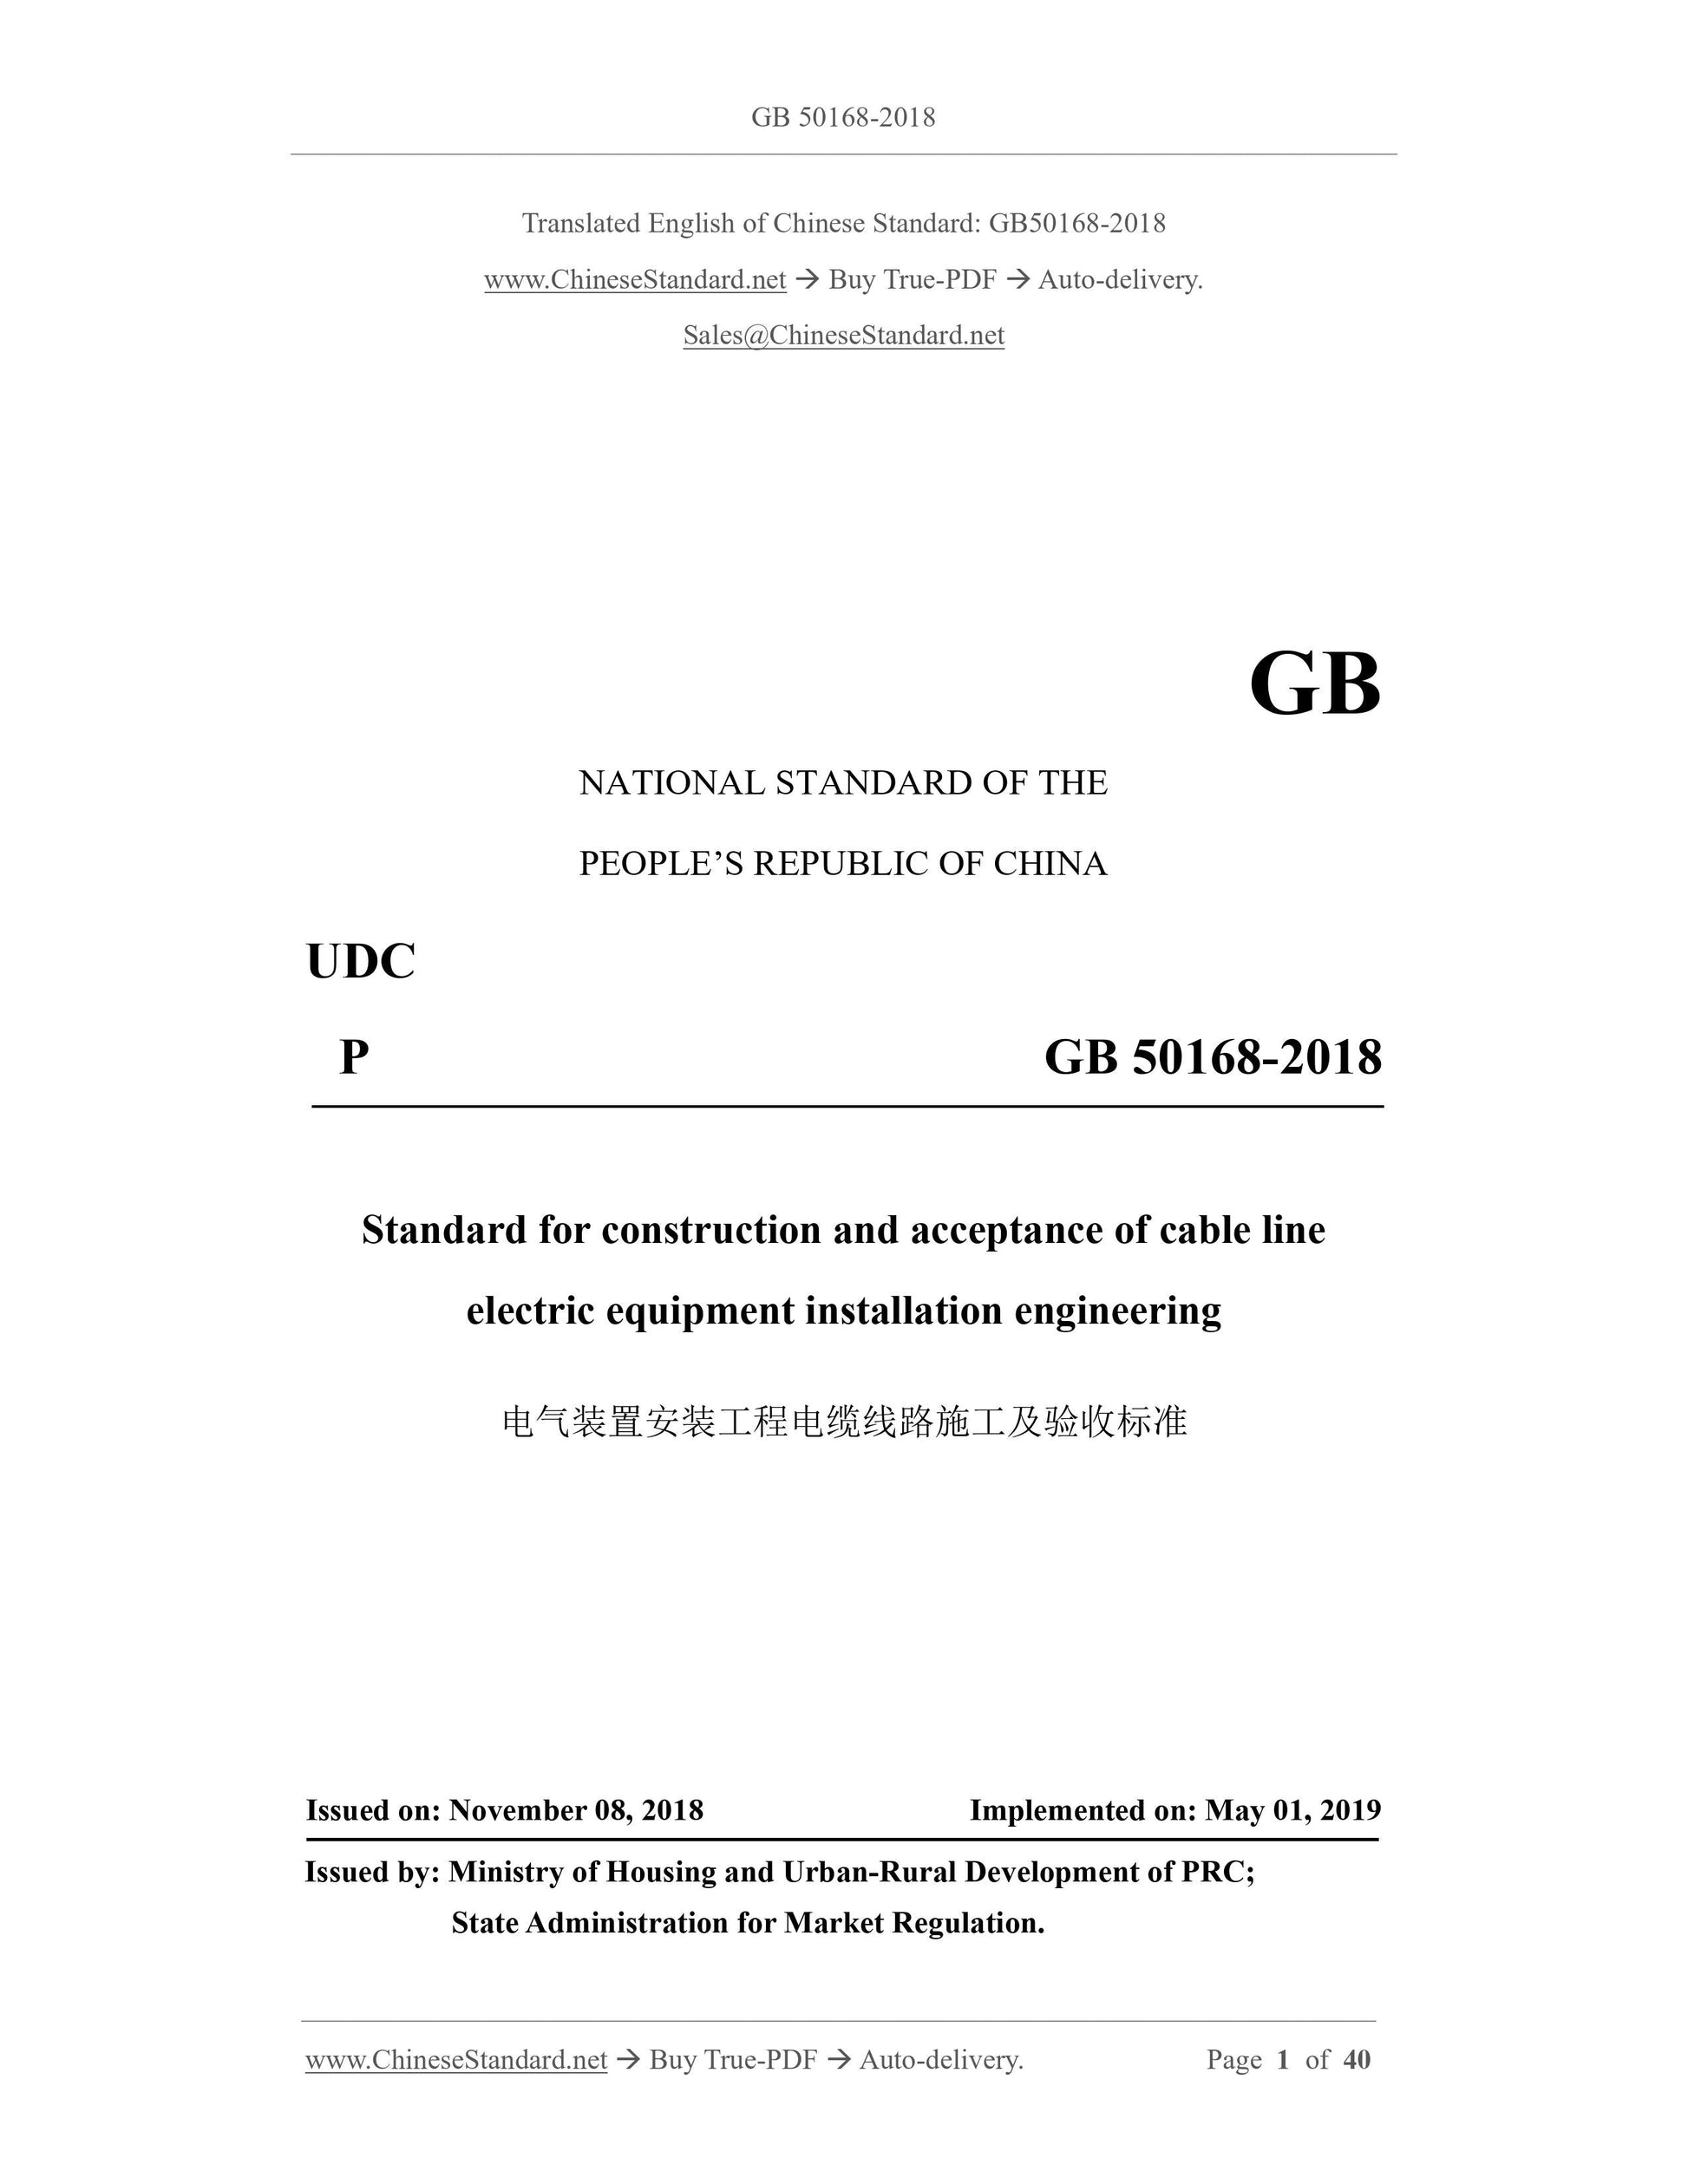 GB 50168-2018 Page 1